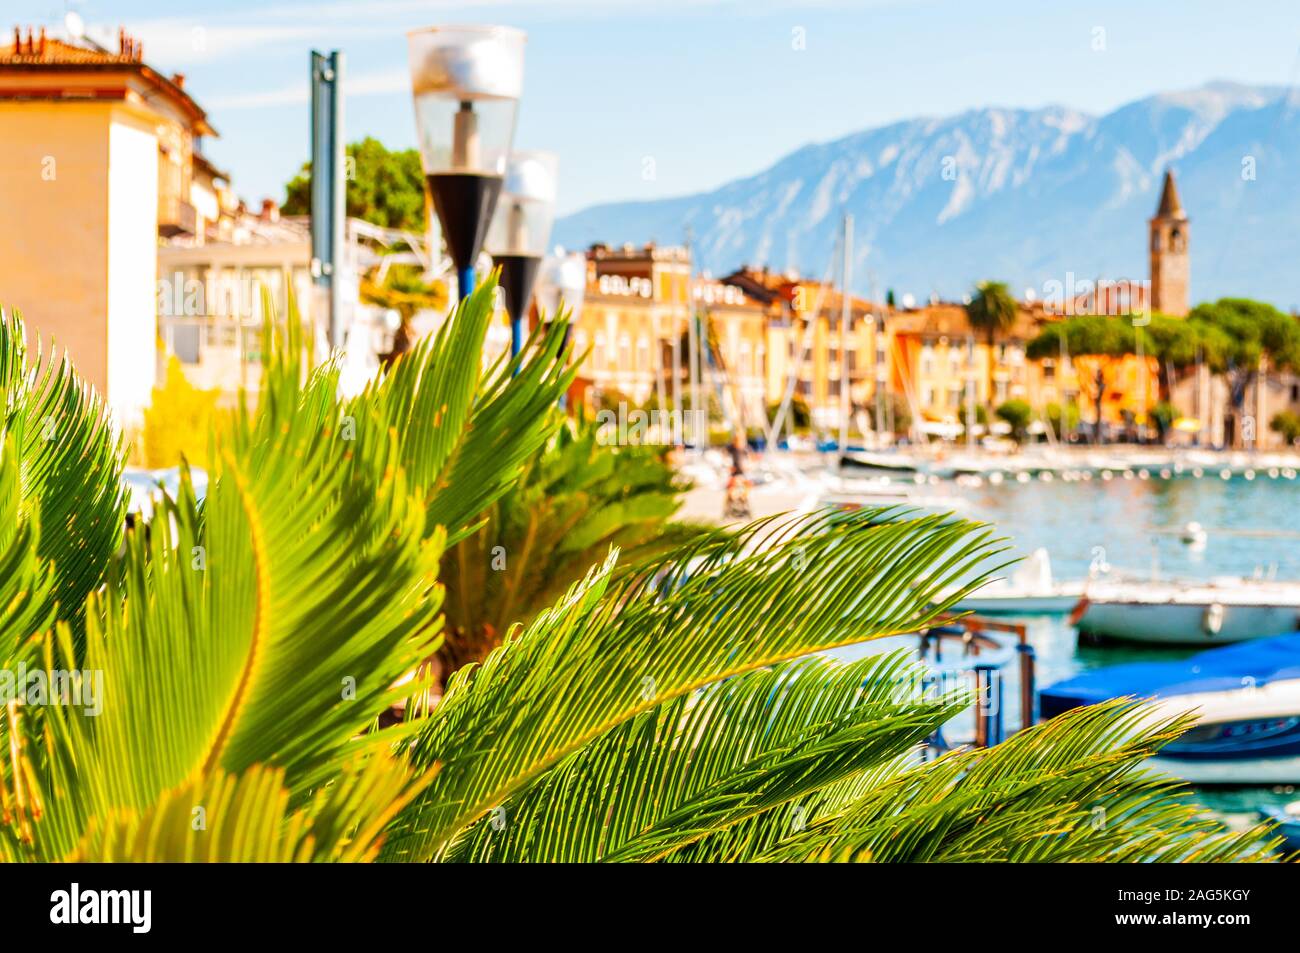 Garda lake western shore, Lombardy Italy. View on medieval Toscolano Maderno cityscape through palm leaves growing on promenade and piers with parked Stock Photo